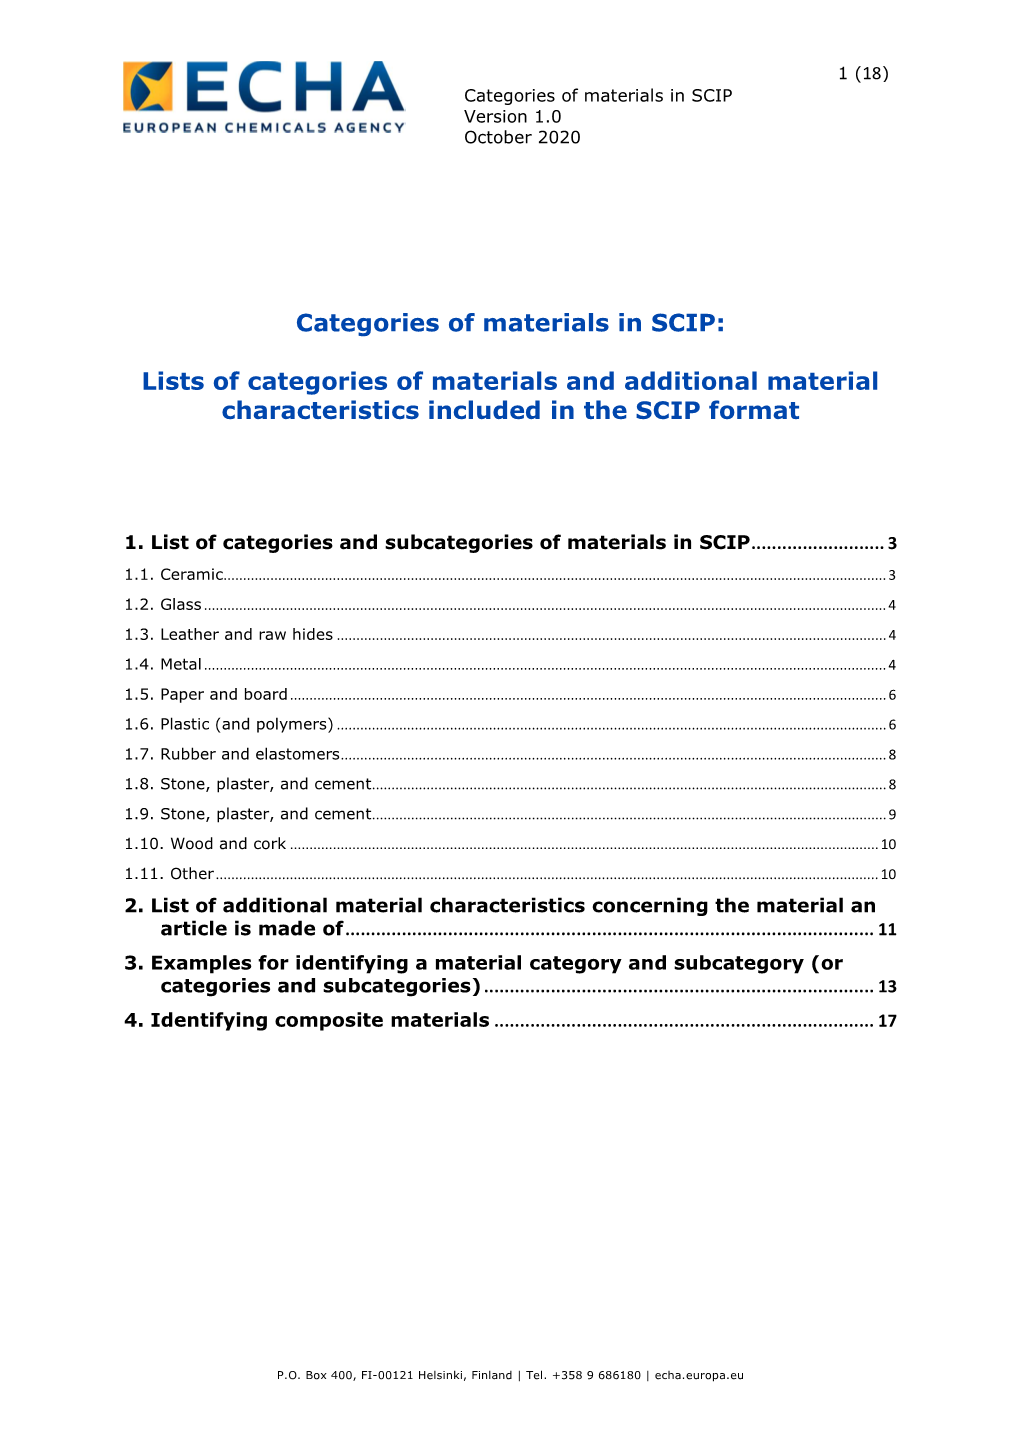 Material Categories for the SCIP Database